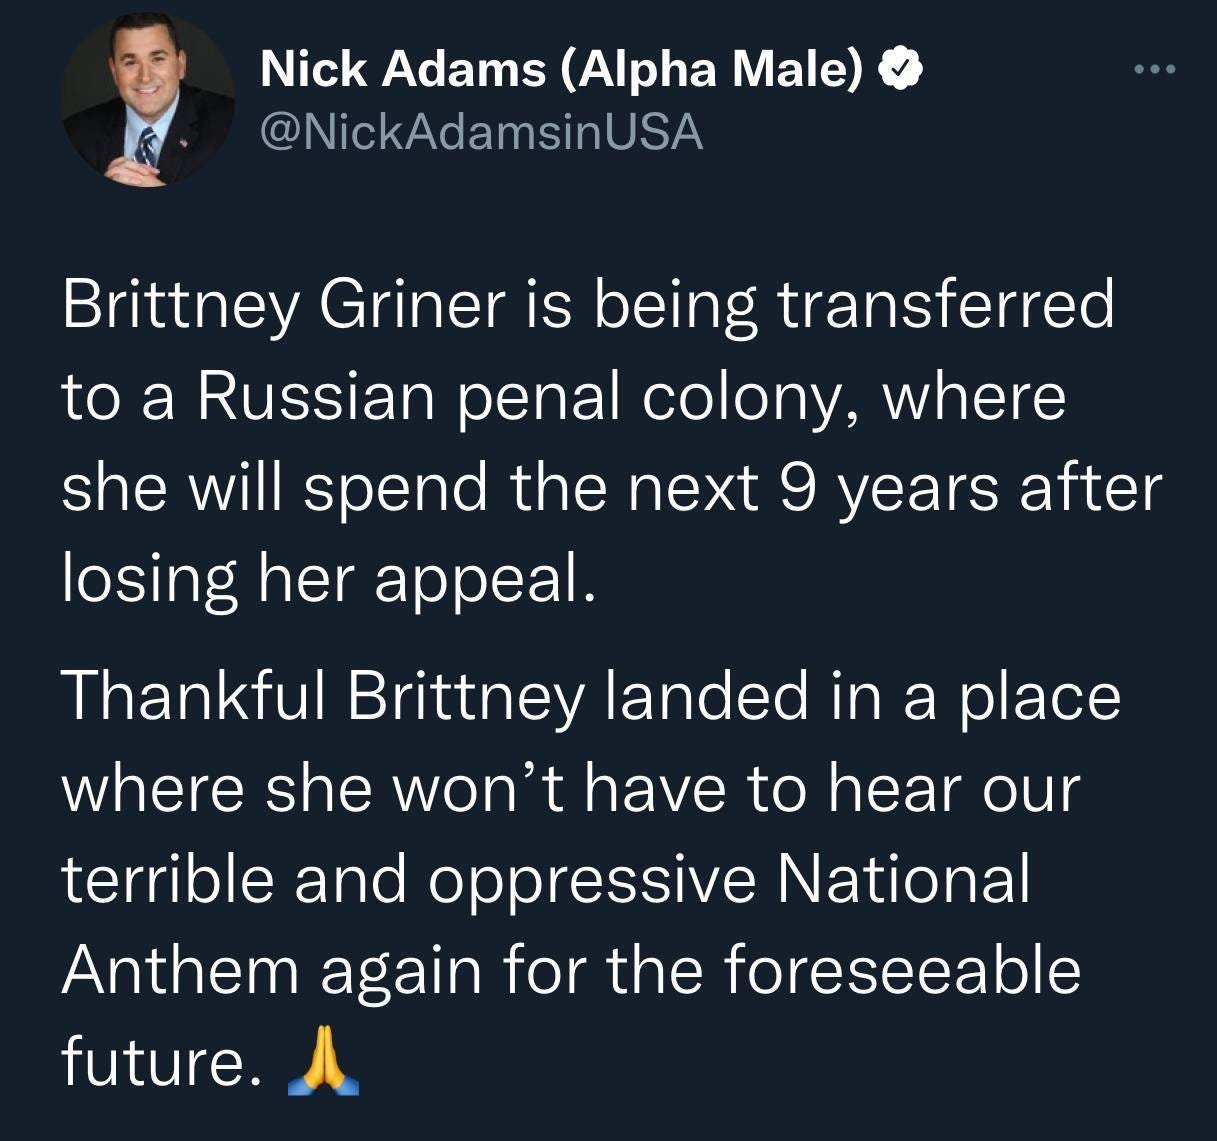 May be a Twitter screenshot of 1 person and text that says 'Nick Adams (Alpha Male) @NickAdamsinUSA Brittney Griner is being transferred to a Russian penal colony, where she will spend the next 9 years atter losing her appeal. Thankful Brittney landed in a place where she won't have to hear our terrible and oppressive National Anthem again for the foreseeable future.'